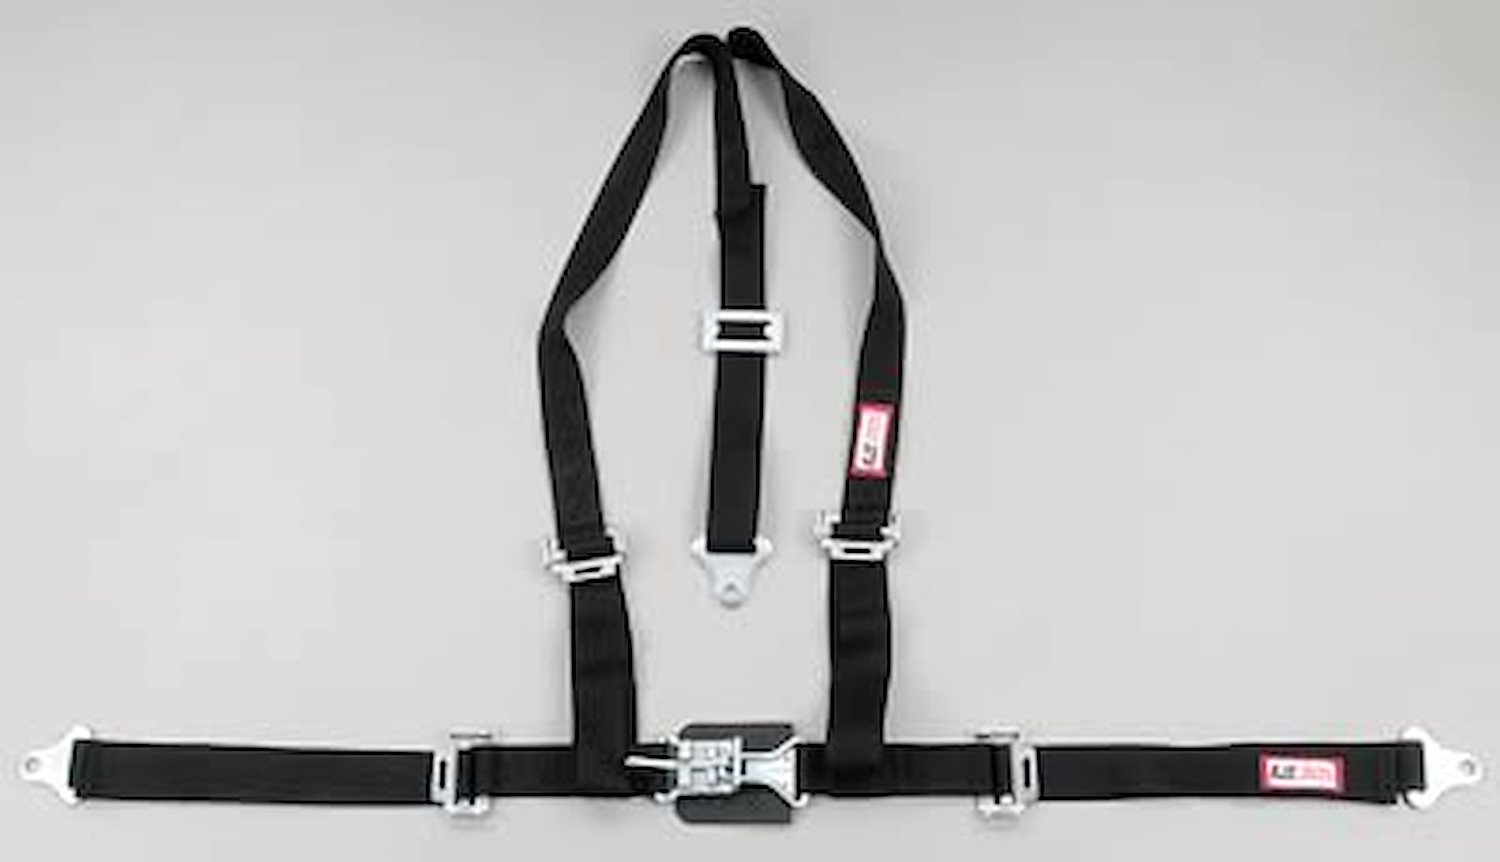 NON-SFI L&L HARNESS 3 PULL DOWN Lap Belt SEWN IN 2 Shoulder Harness V ROLL BAR Mount w/STERNUM STRAP ALL WRAP ENDS GRAY